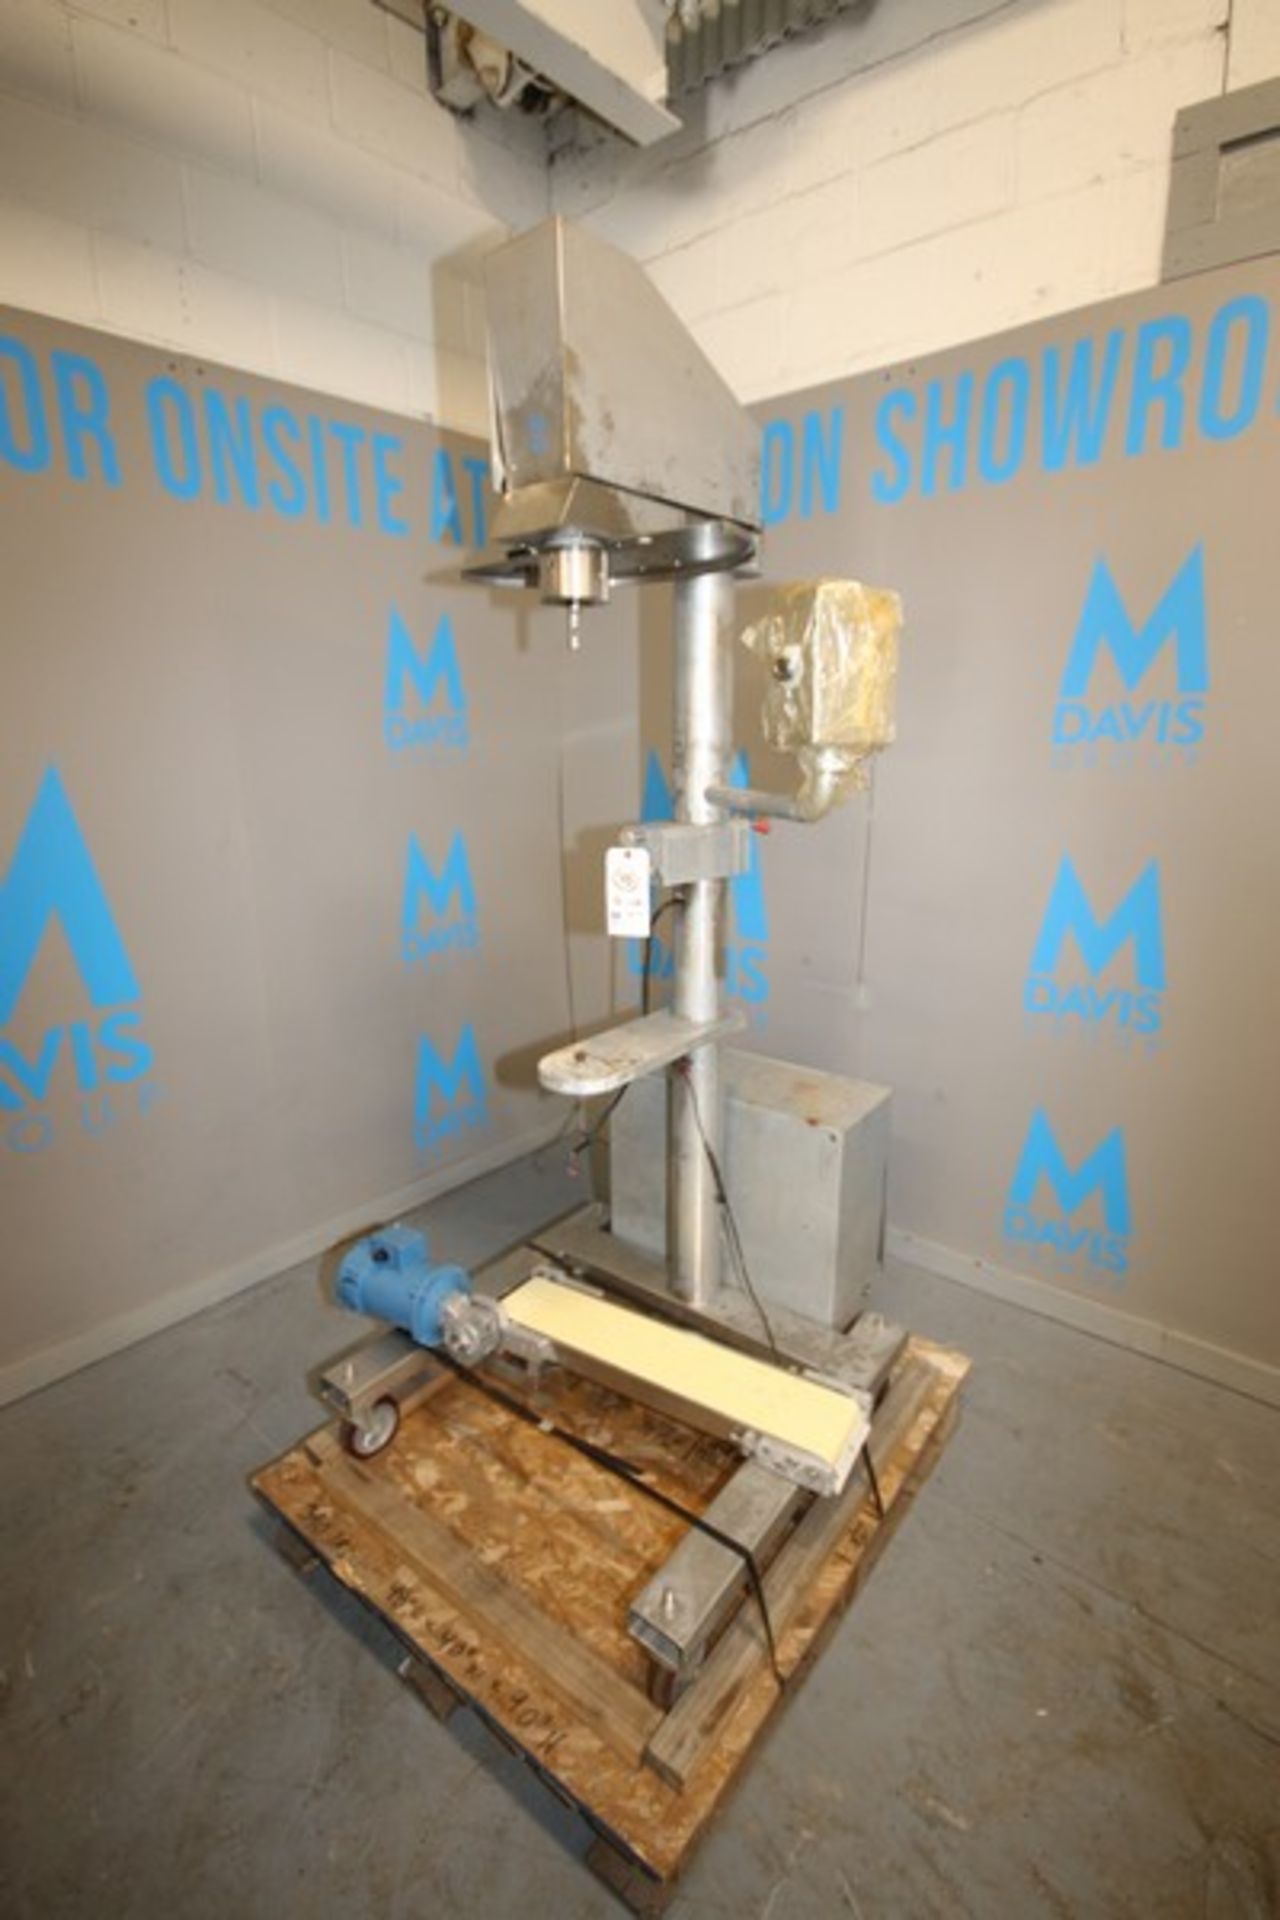 Arcobaleno S/S Auger Filler,M/N FS1000, S/N 10844, 230 Volts, 3 Phase, with Straight Section of - Image 15 of 15